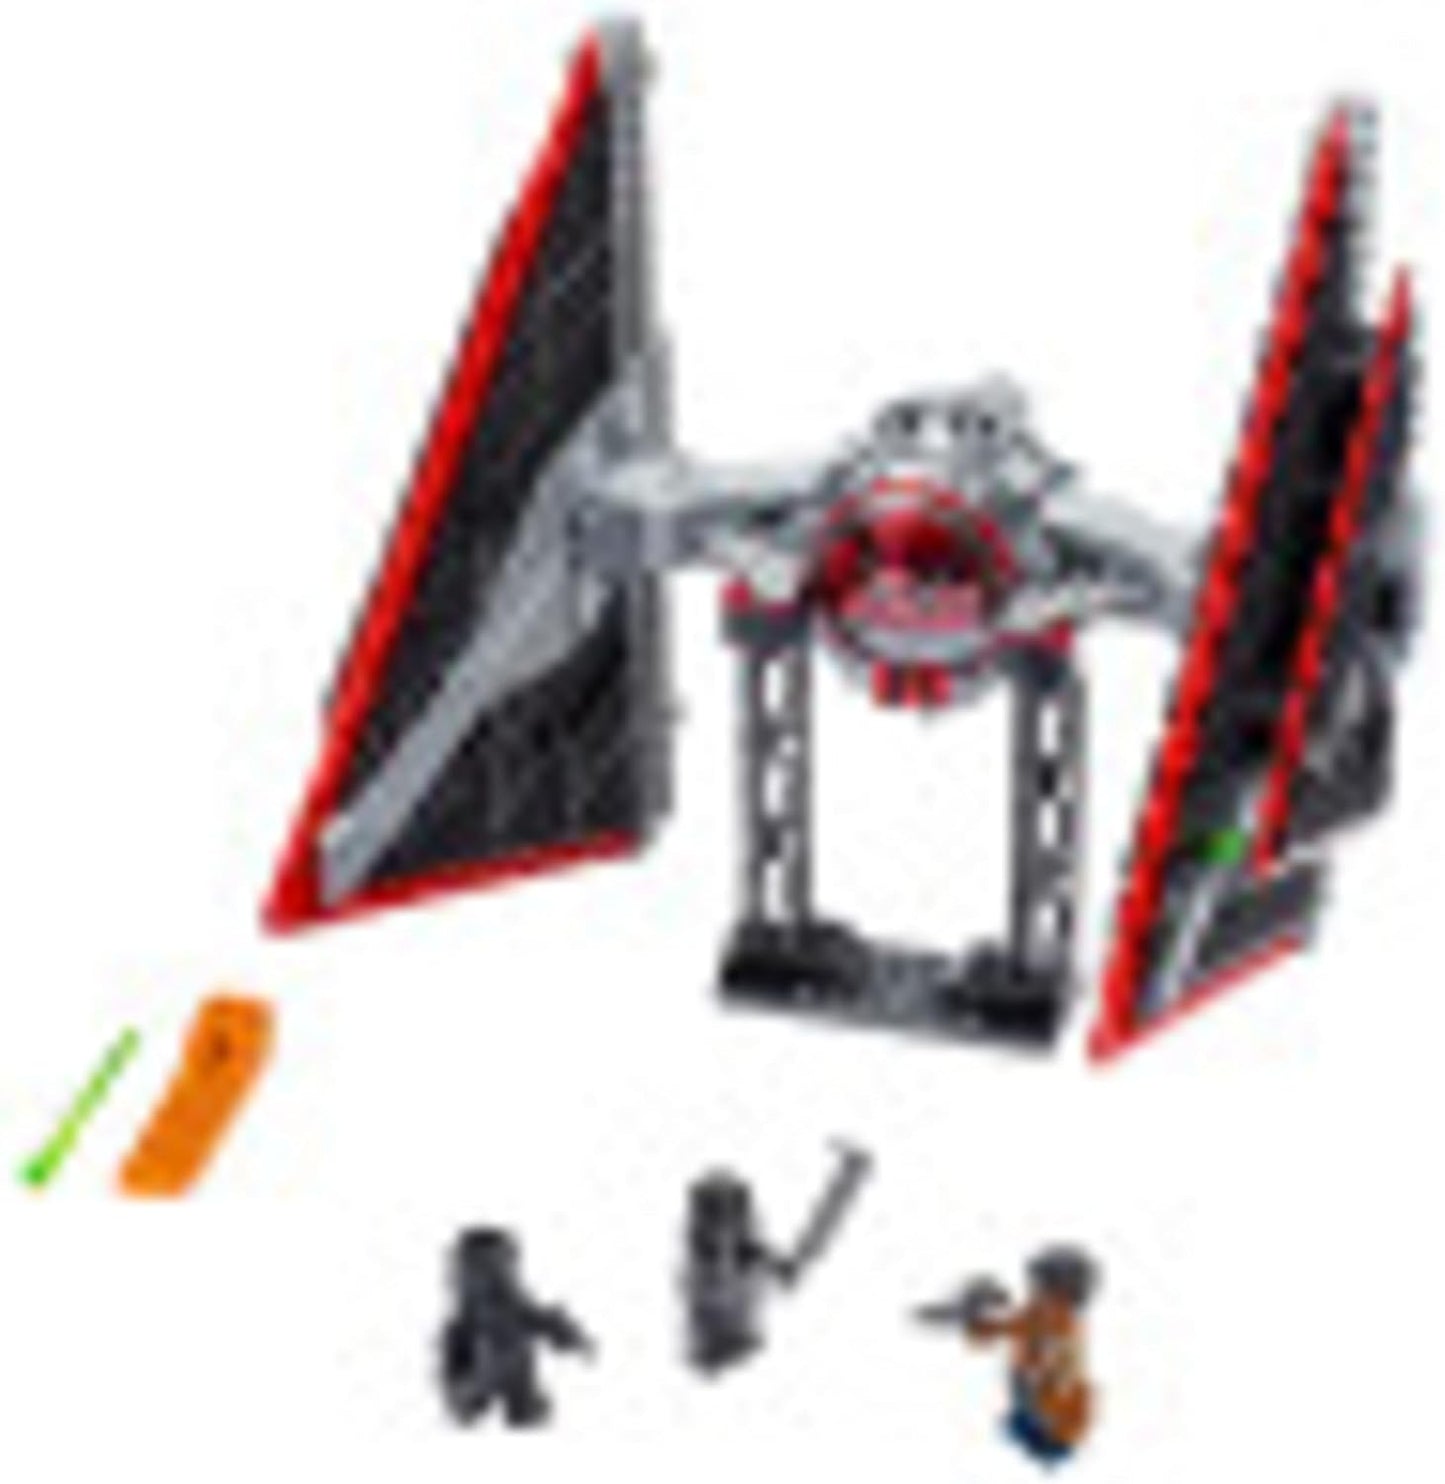 LEGO Star Wars Sith TIE Fighter 75272 Collectible Building Kit, Cool Construction Toy for Kids (470 Pieces)